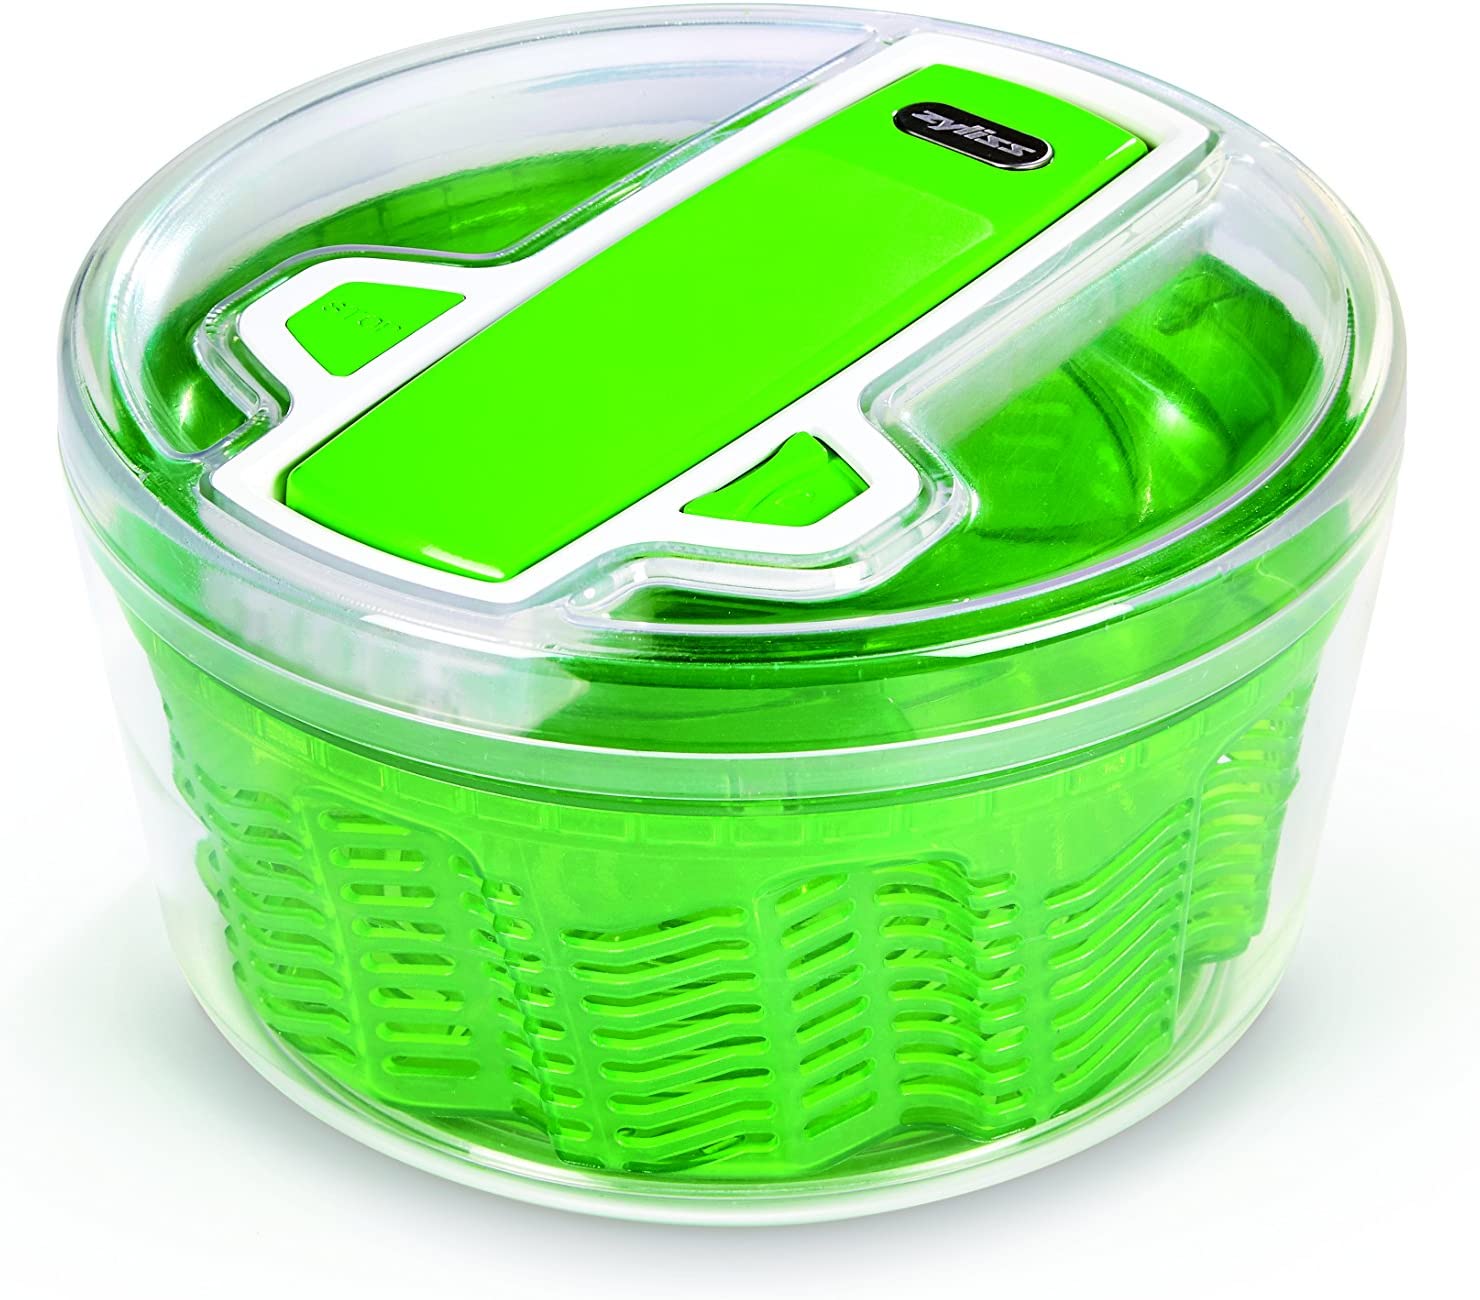 Zyliss - Salad spinner - with AquaVent technology - removes up to 25% more water. Diameter: 20 cm.